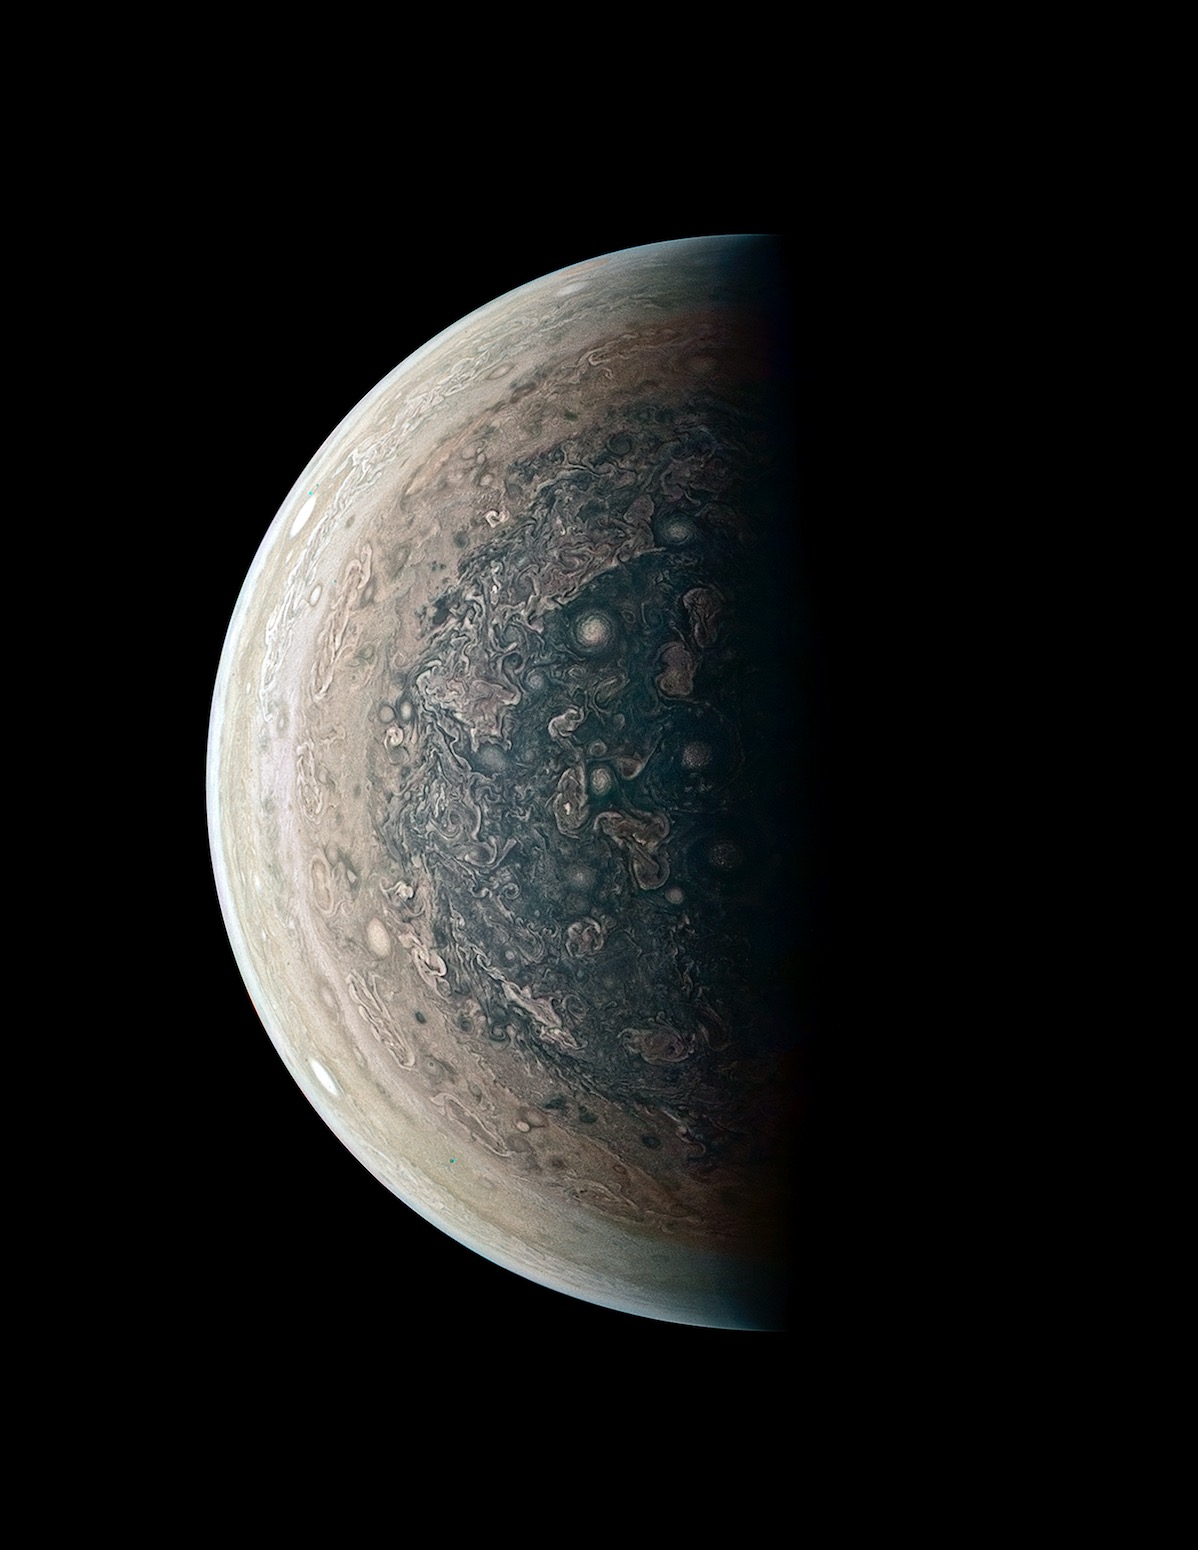 Enjoy This Lovely Wallpaper Of Jupiter From Below Osxdaily